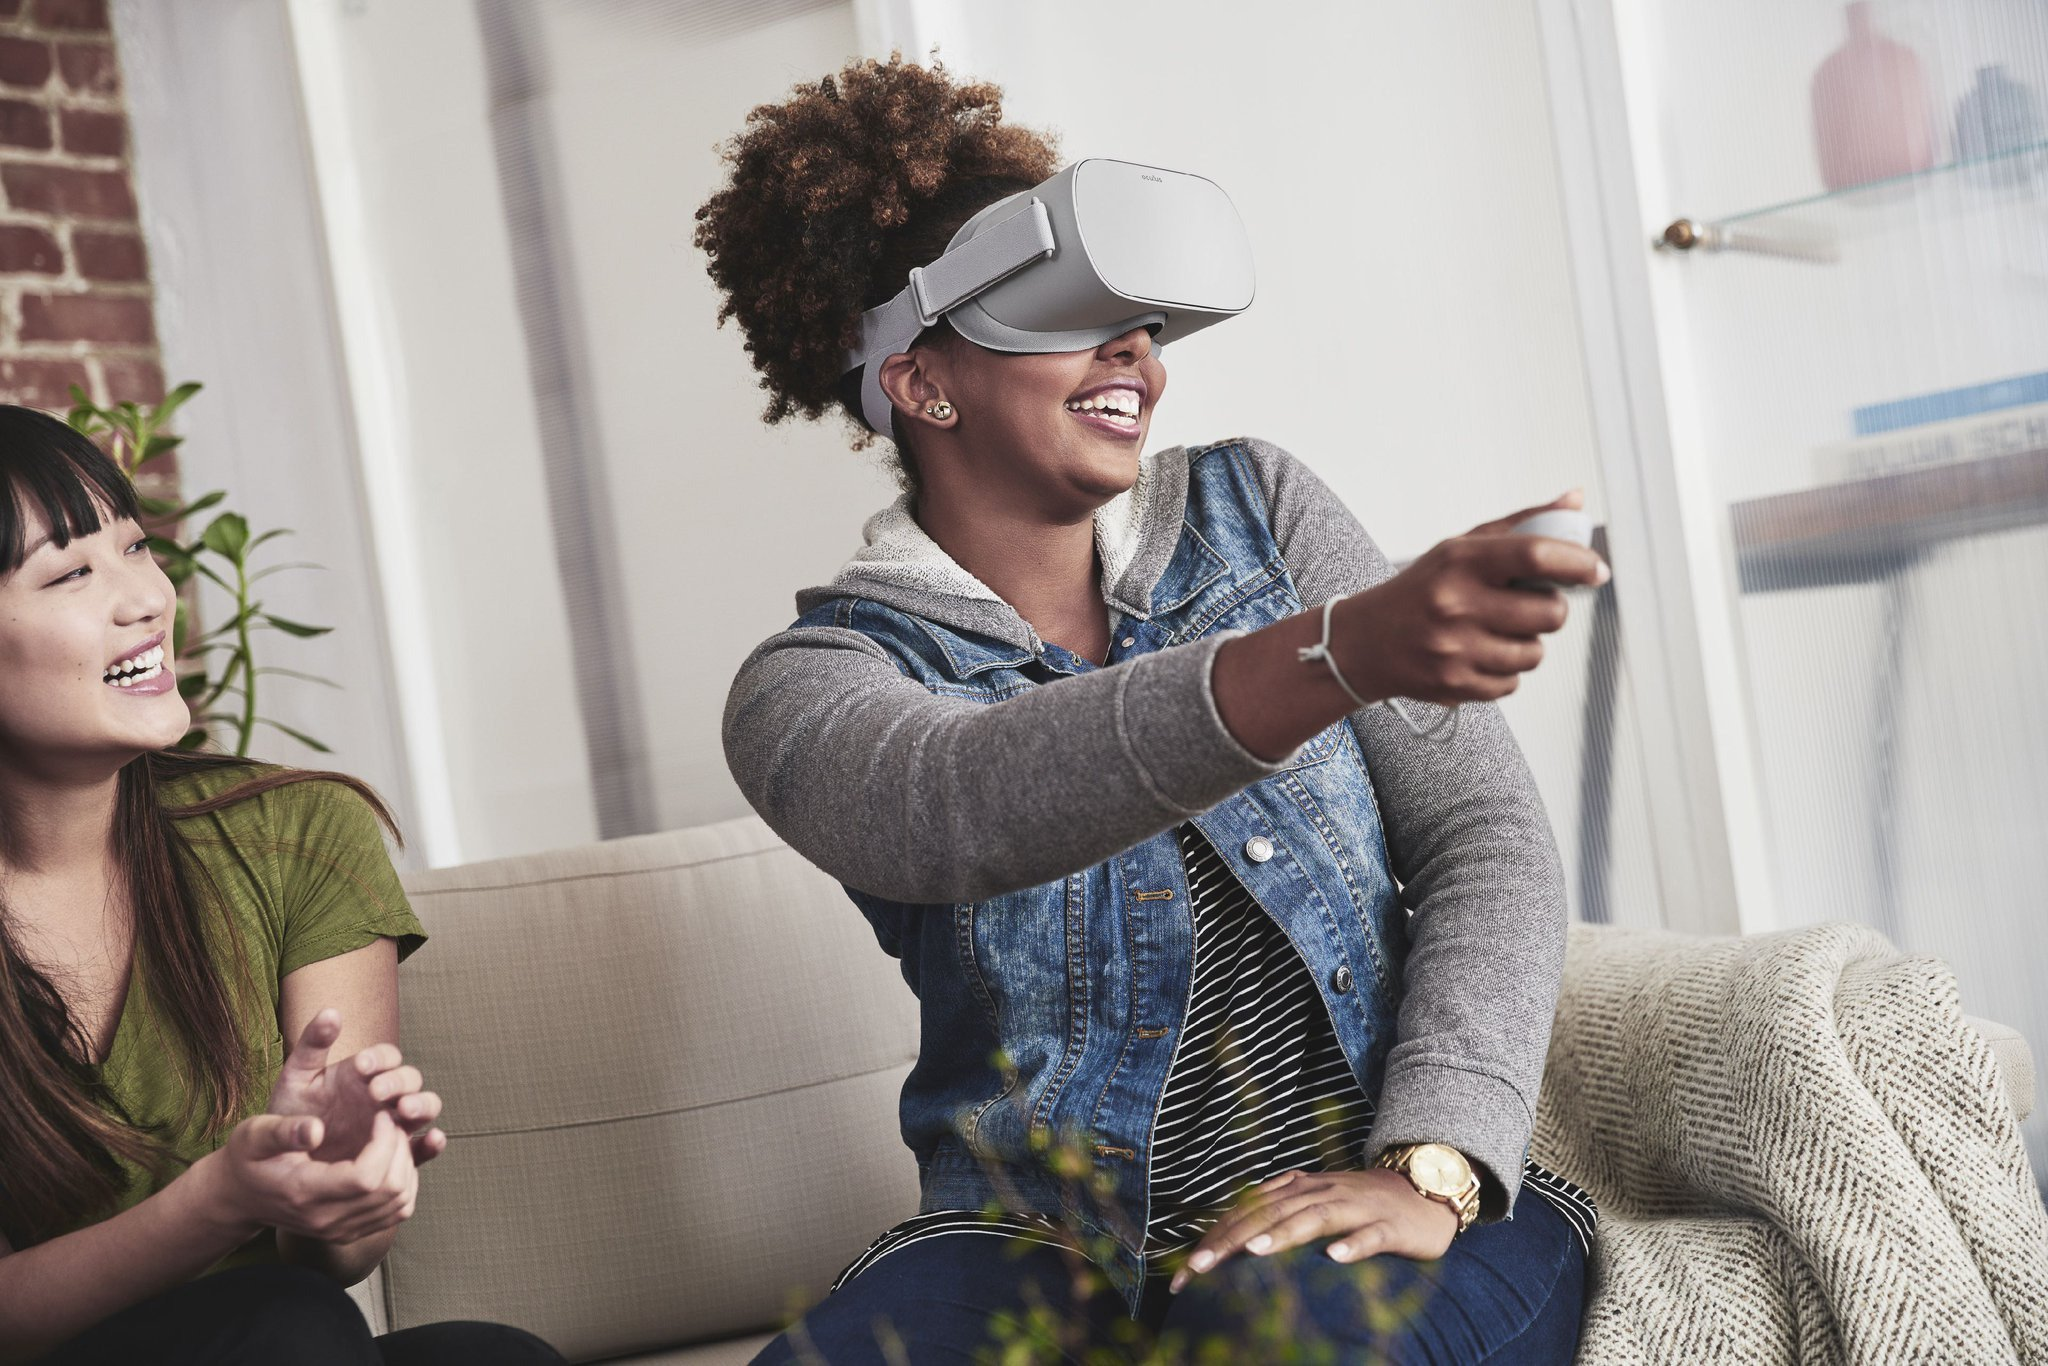 Image for Oculus announces the standalone $199 Oculus Go, and the Oculus Rift is now cheaper